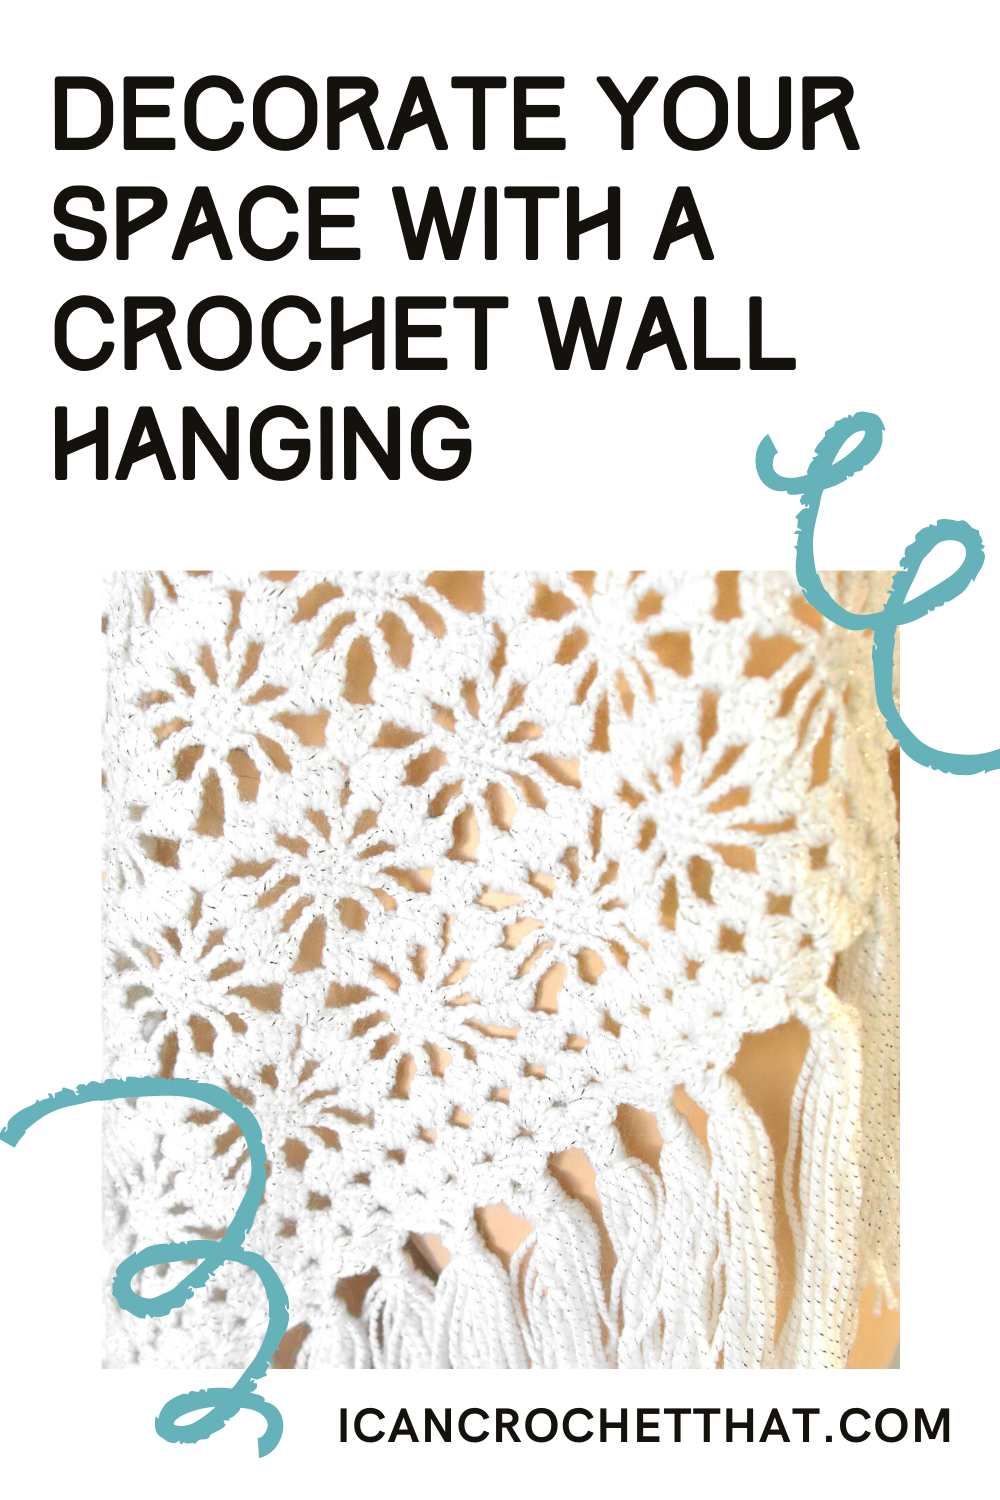 15 Incredible Crochet Wall Hanging Patterns to Decorate Your Space